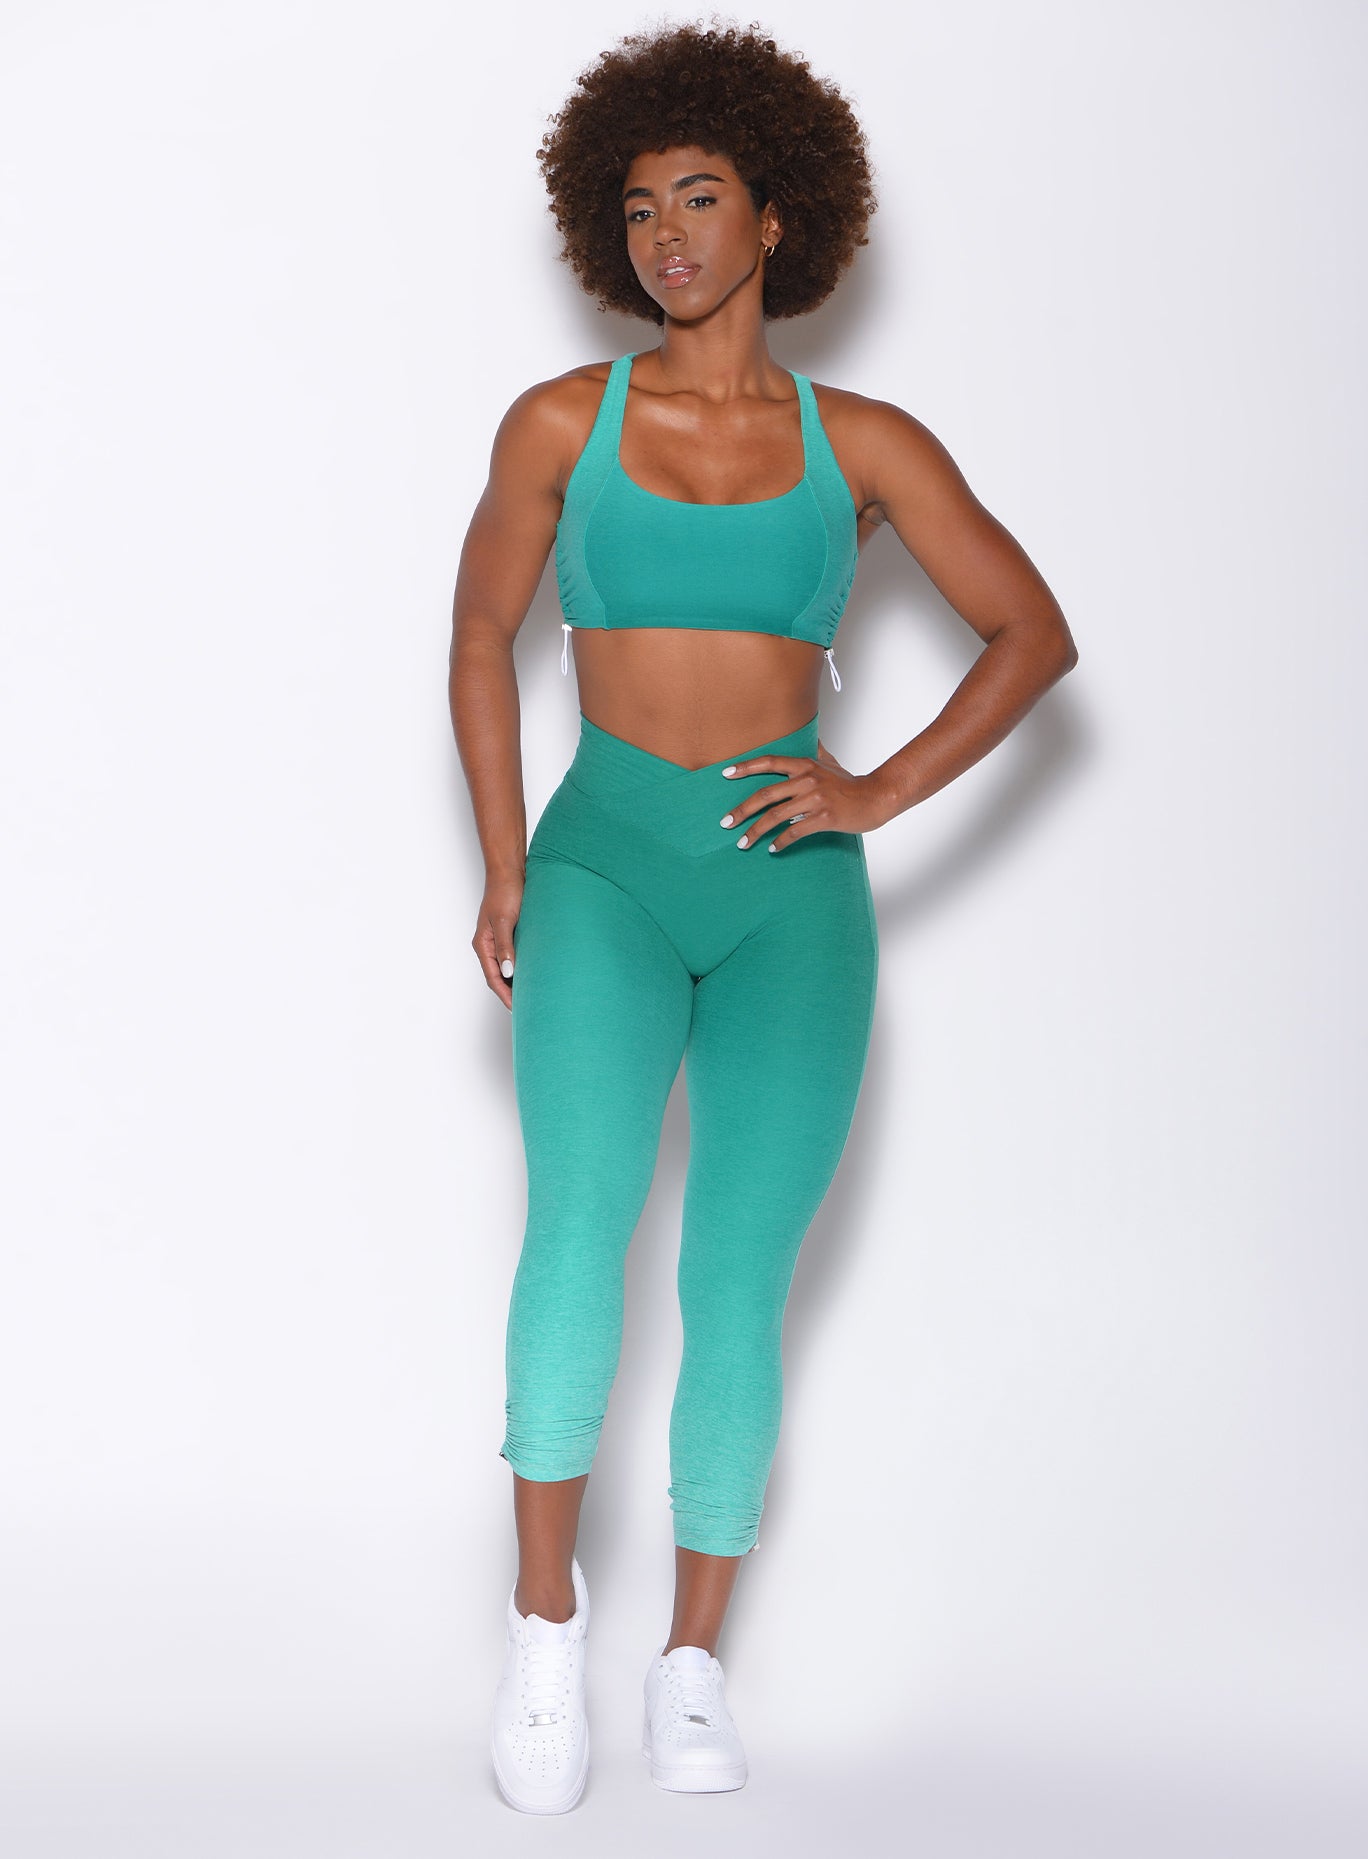 Front side profile view of a model wearing our toggle leggings in Ombre Ibiza Green and a matching sports bra